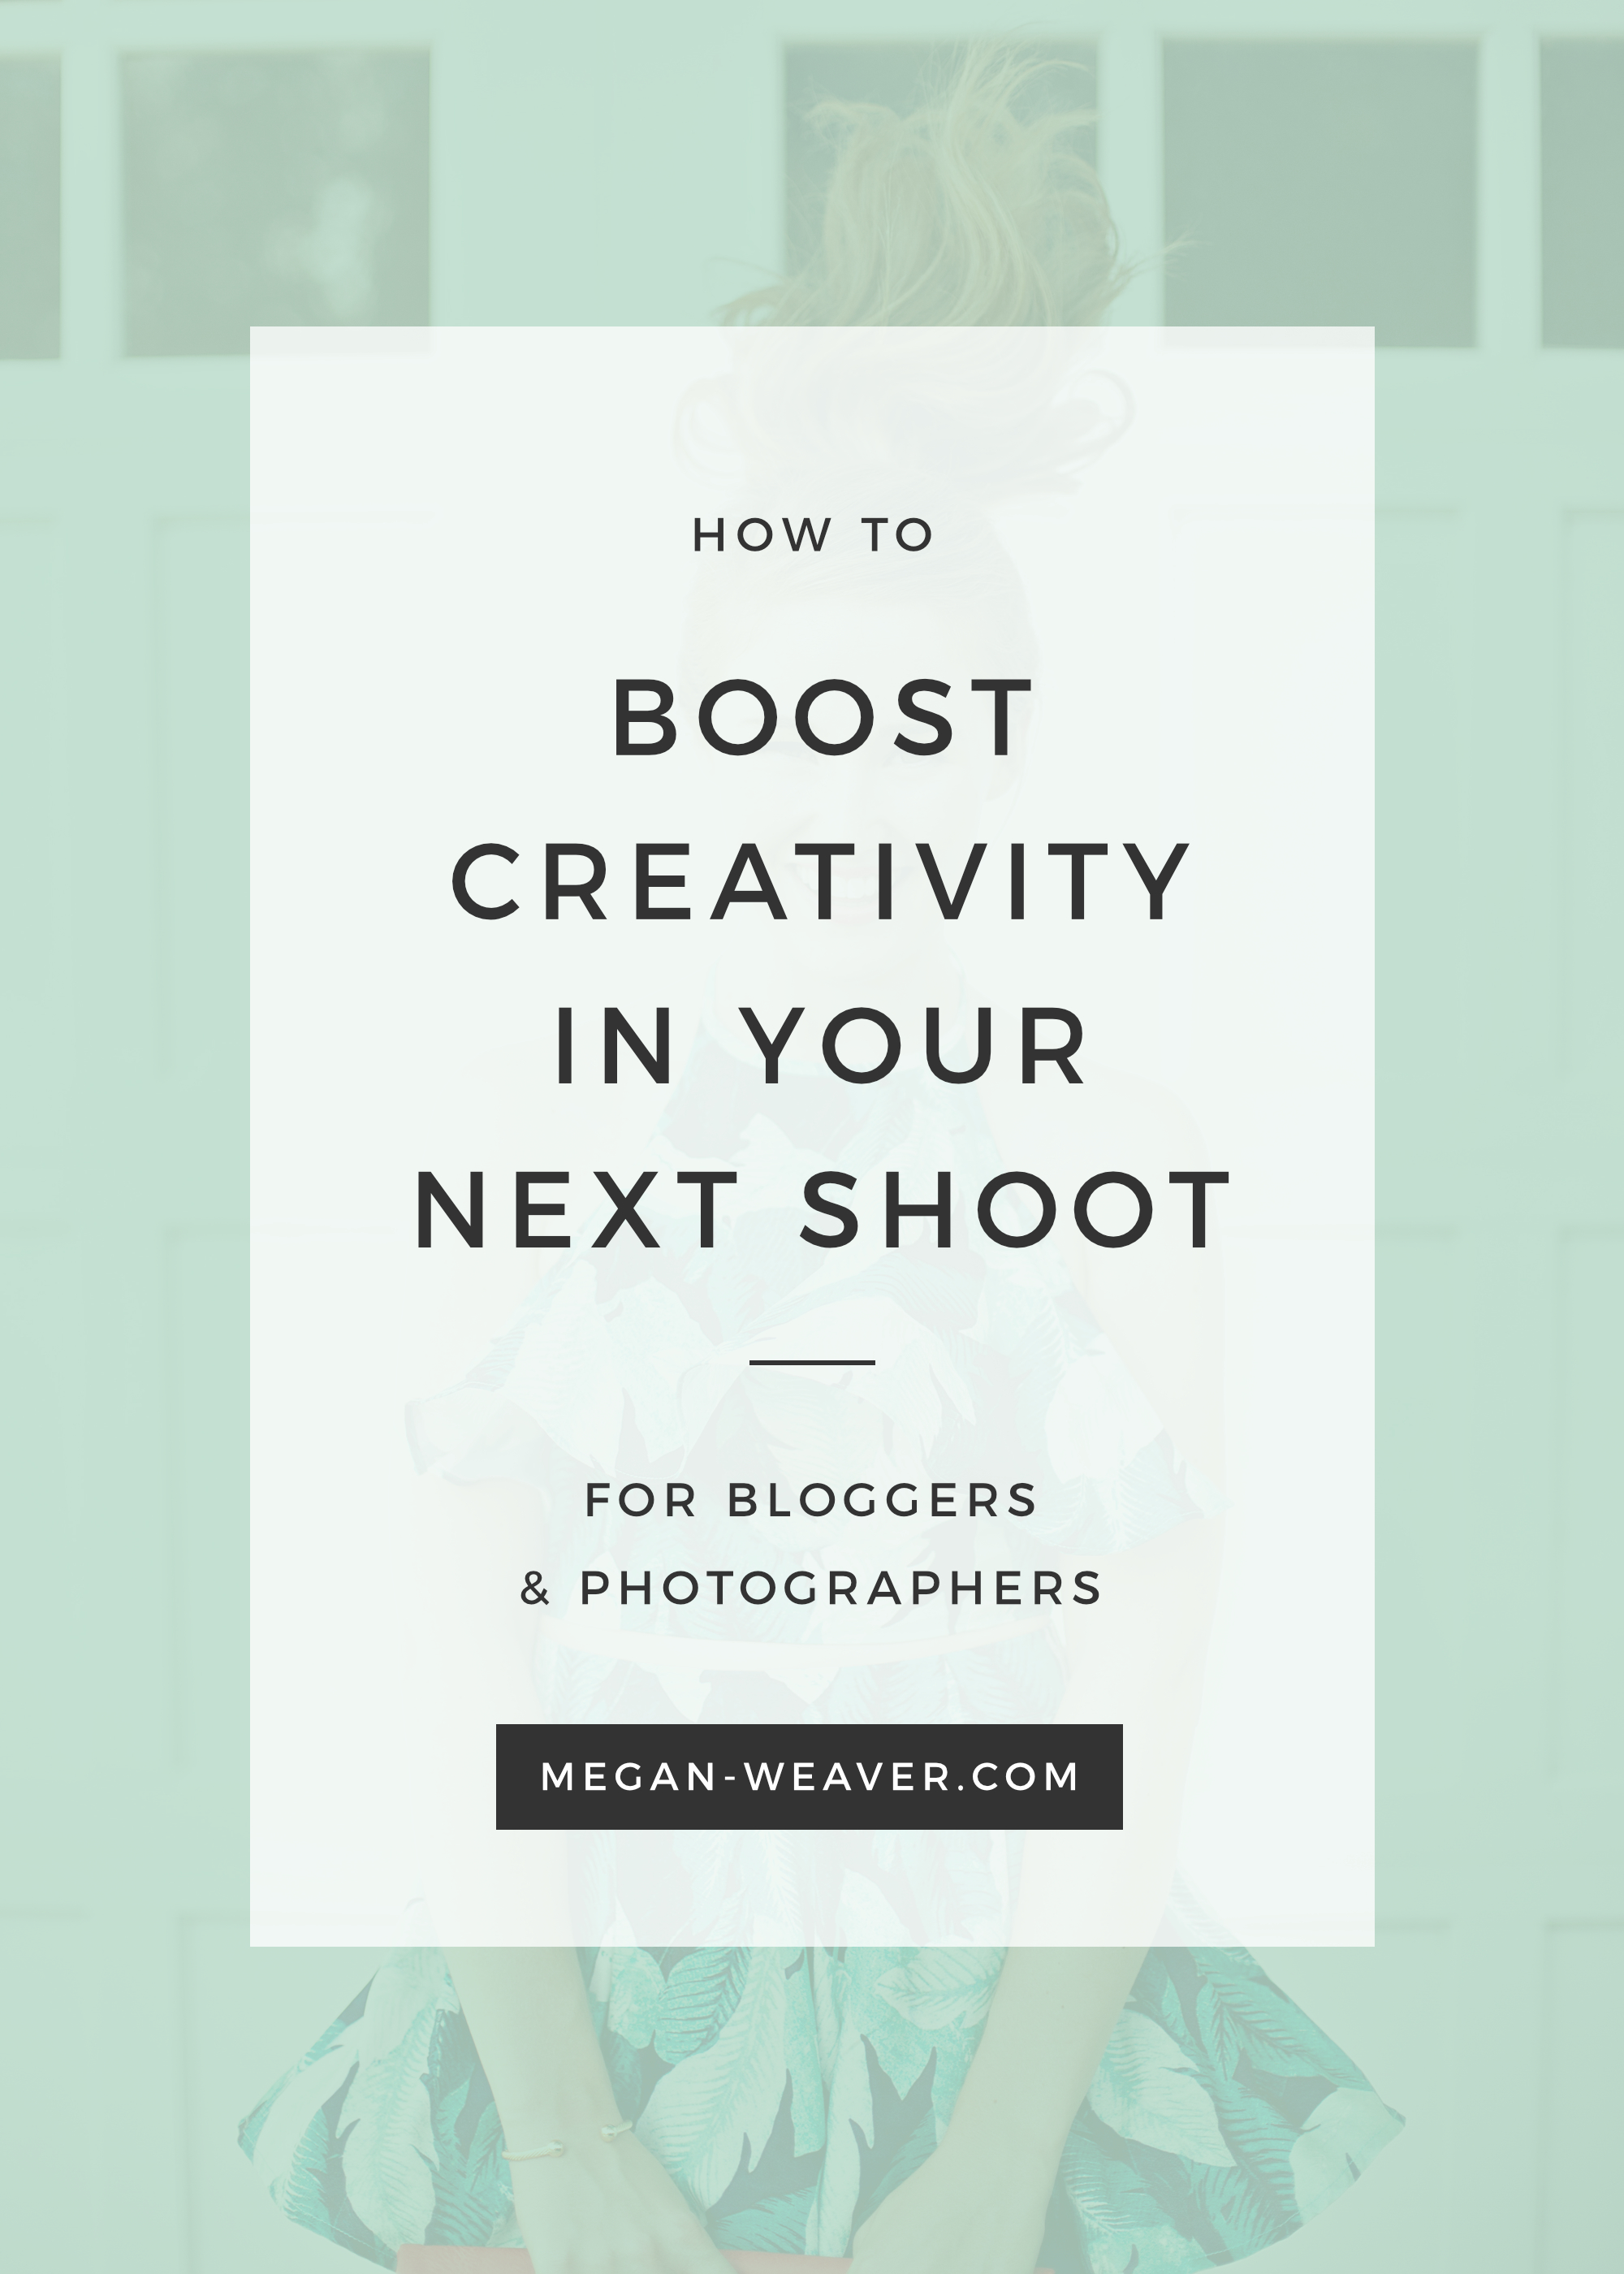 Stand apart from the crowd and let your blog photos shine. How to boost creativity in your next shoot.